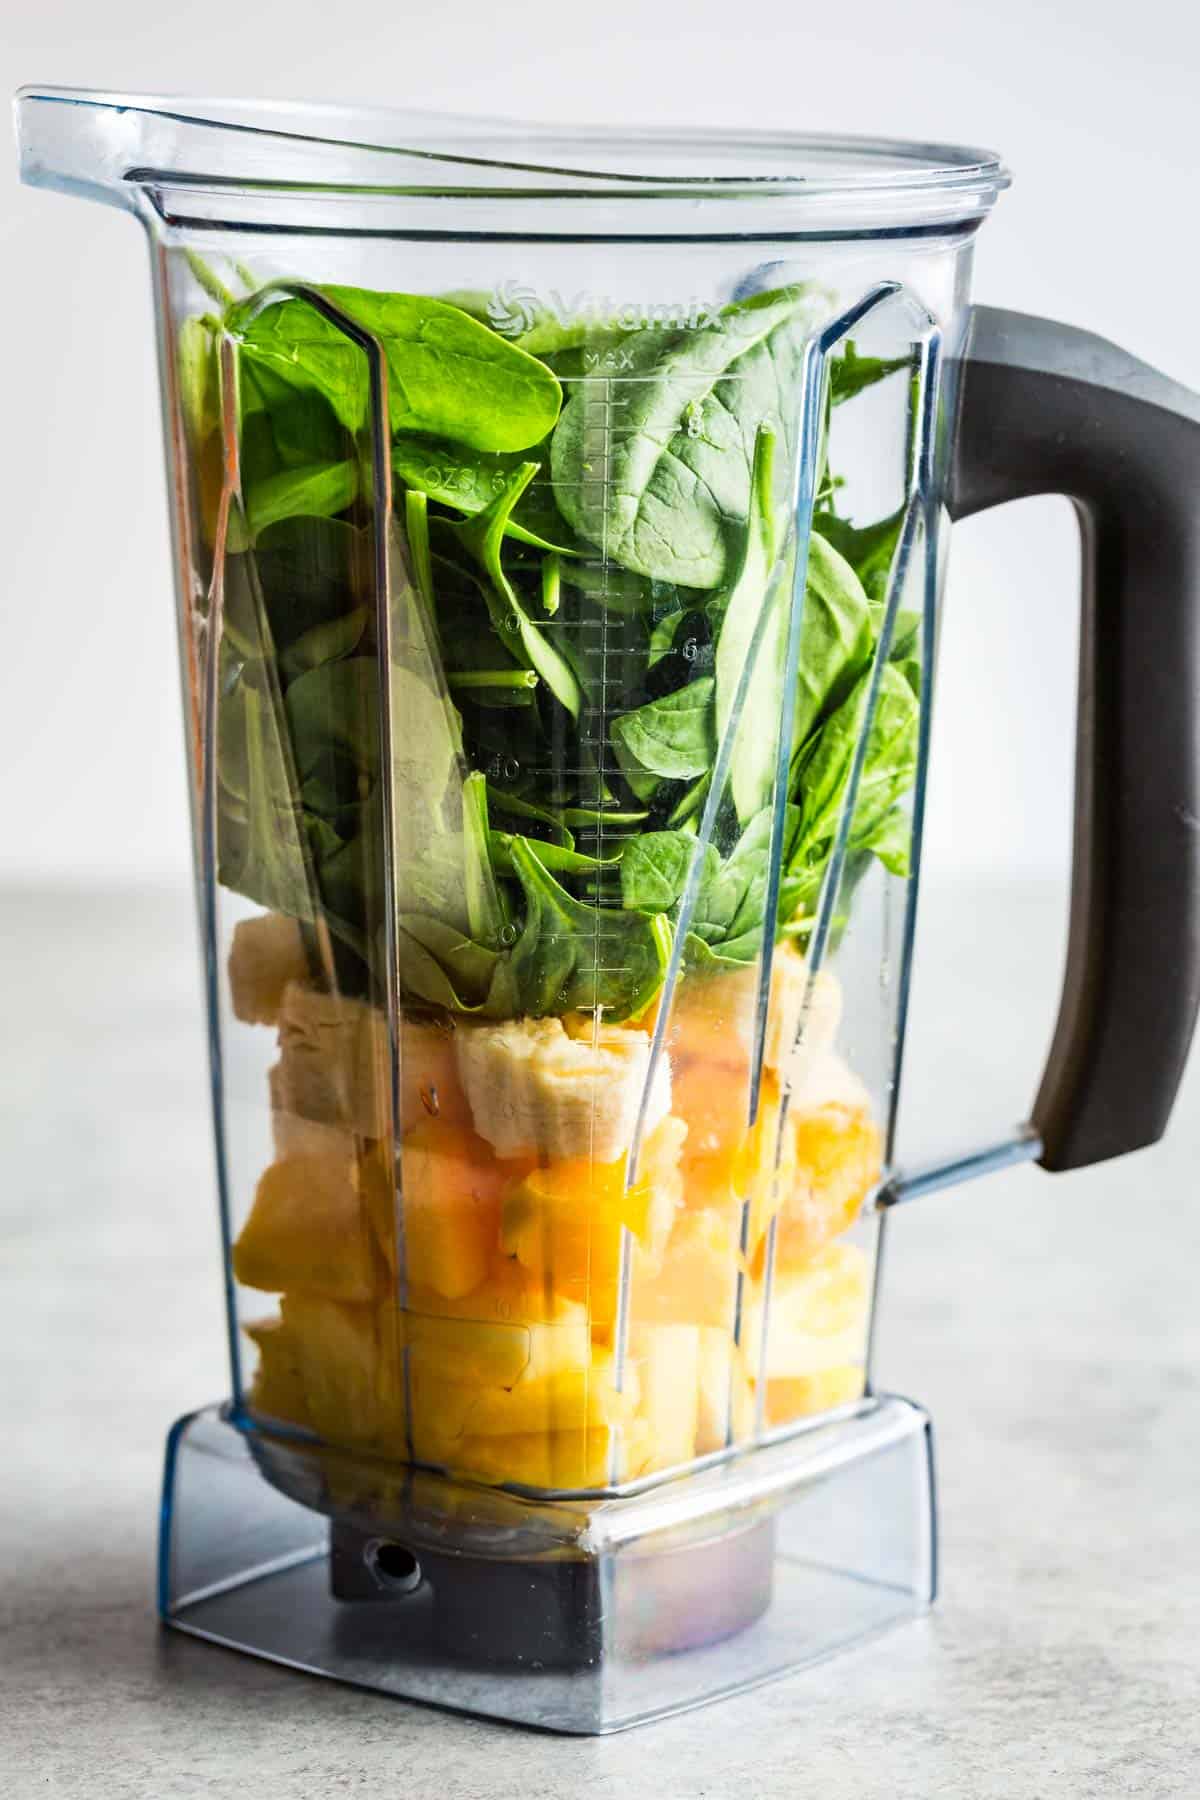 Adding the pineapple, mango, banana, and spinach to a blender container.